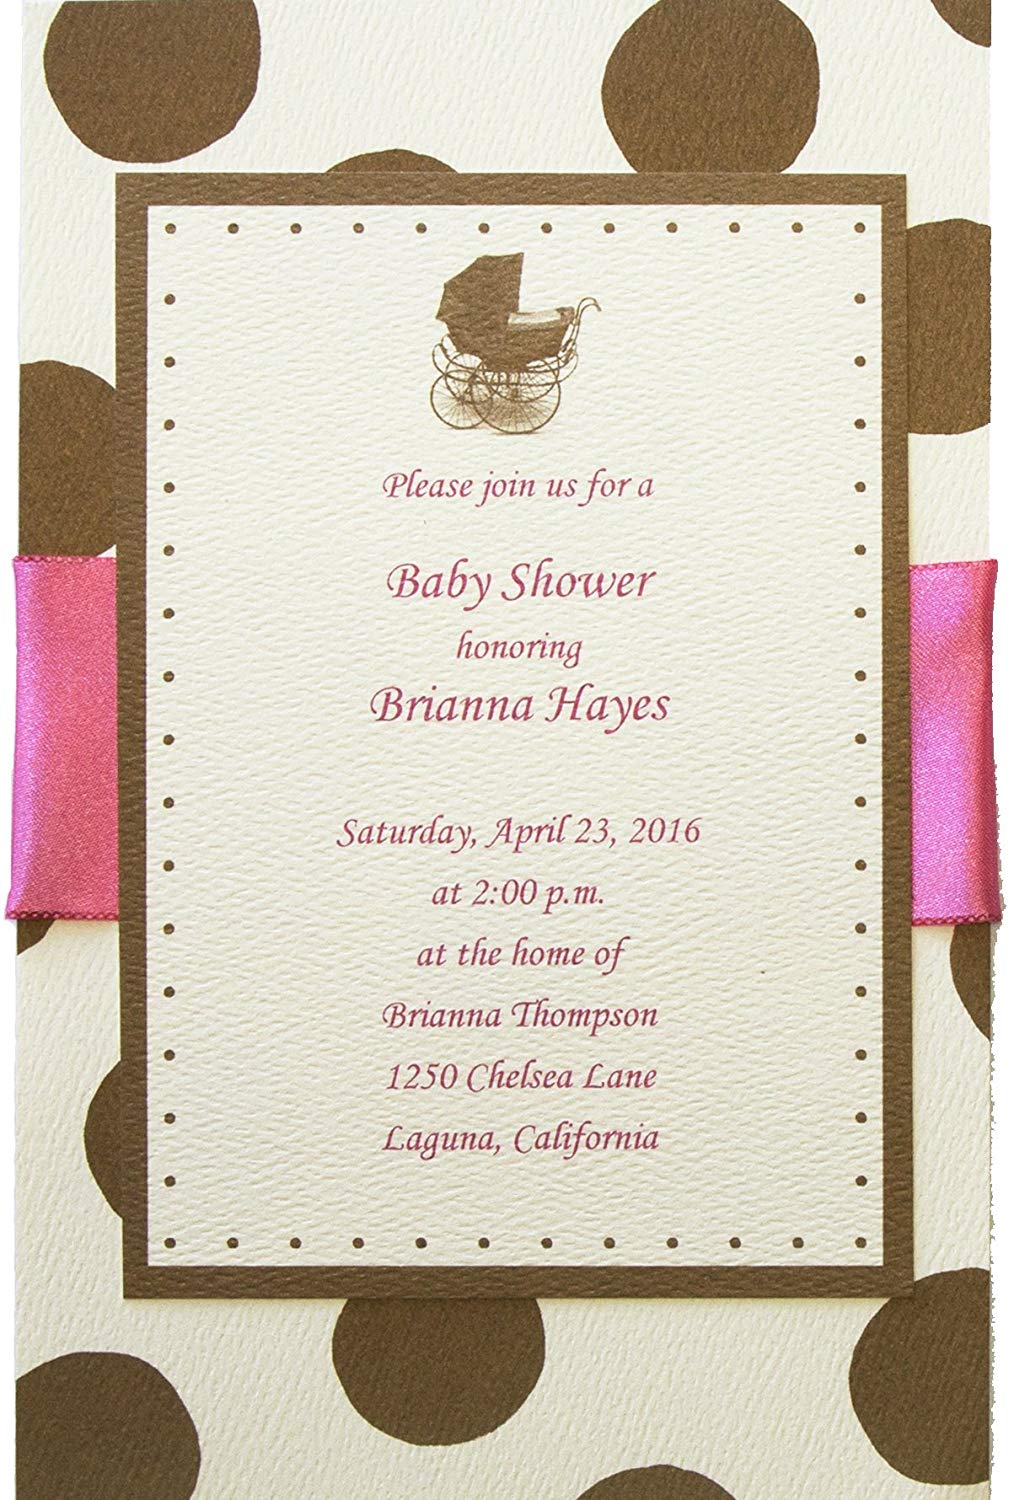 Full Size of Baby Shower:nursery Themes Elegant Baby Shower Unique Baby Shower Decorations Pinterest Baby Shower Ideas For Girls Nursery For Girls Baby Shower Ideas For Girls Baby Girl Themes For Baby Shower Pinterest Nursery Ideas